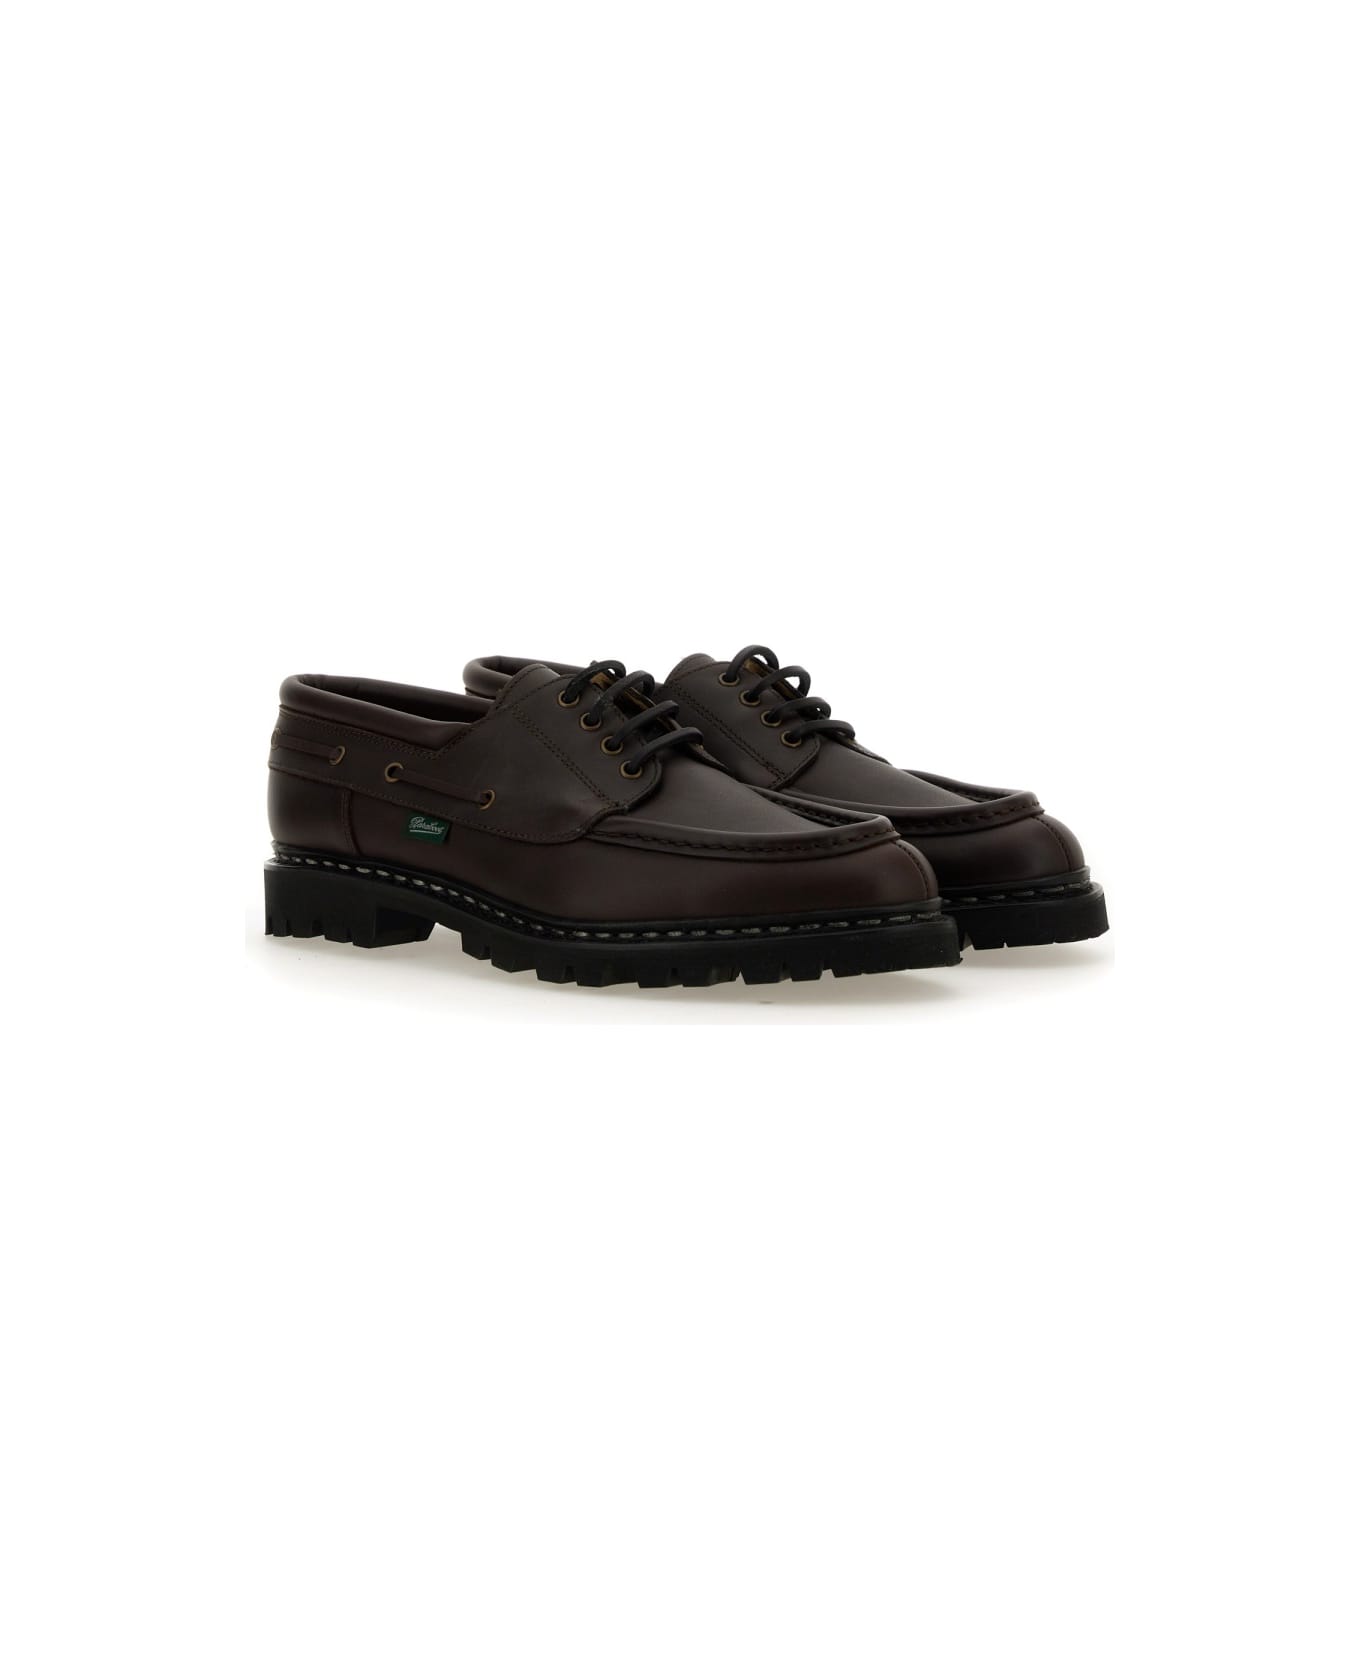 Paraboot Chimey Loafer - BROWN